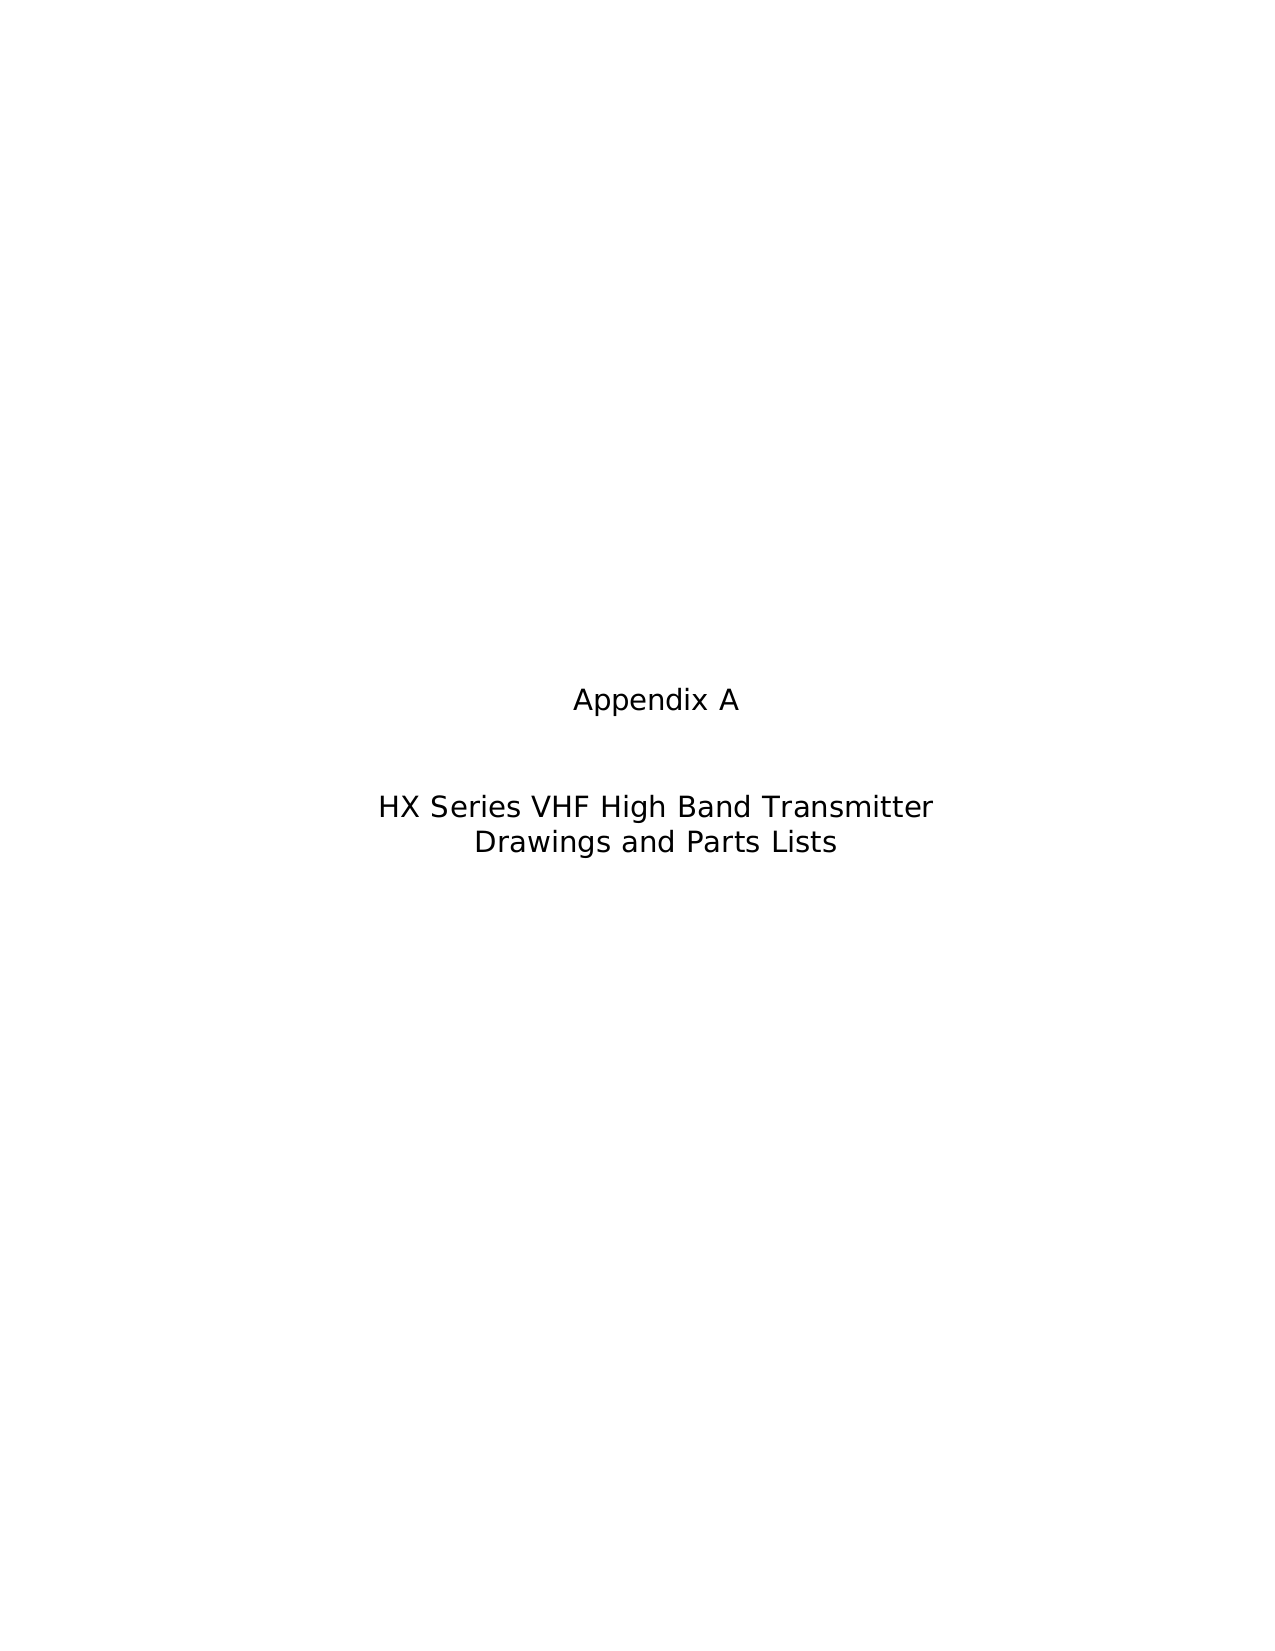                        Appendix A   HX Series VHF High Band Transmitter Drawings and Parts Lists  